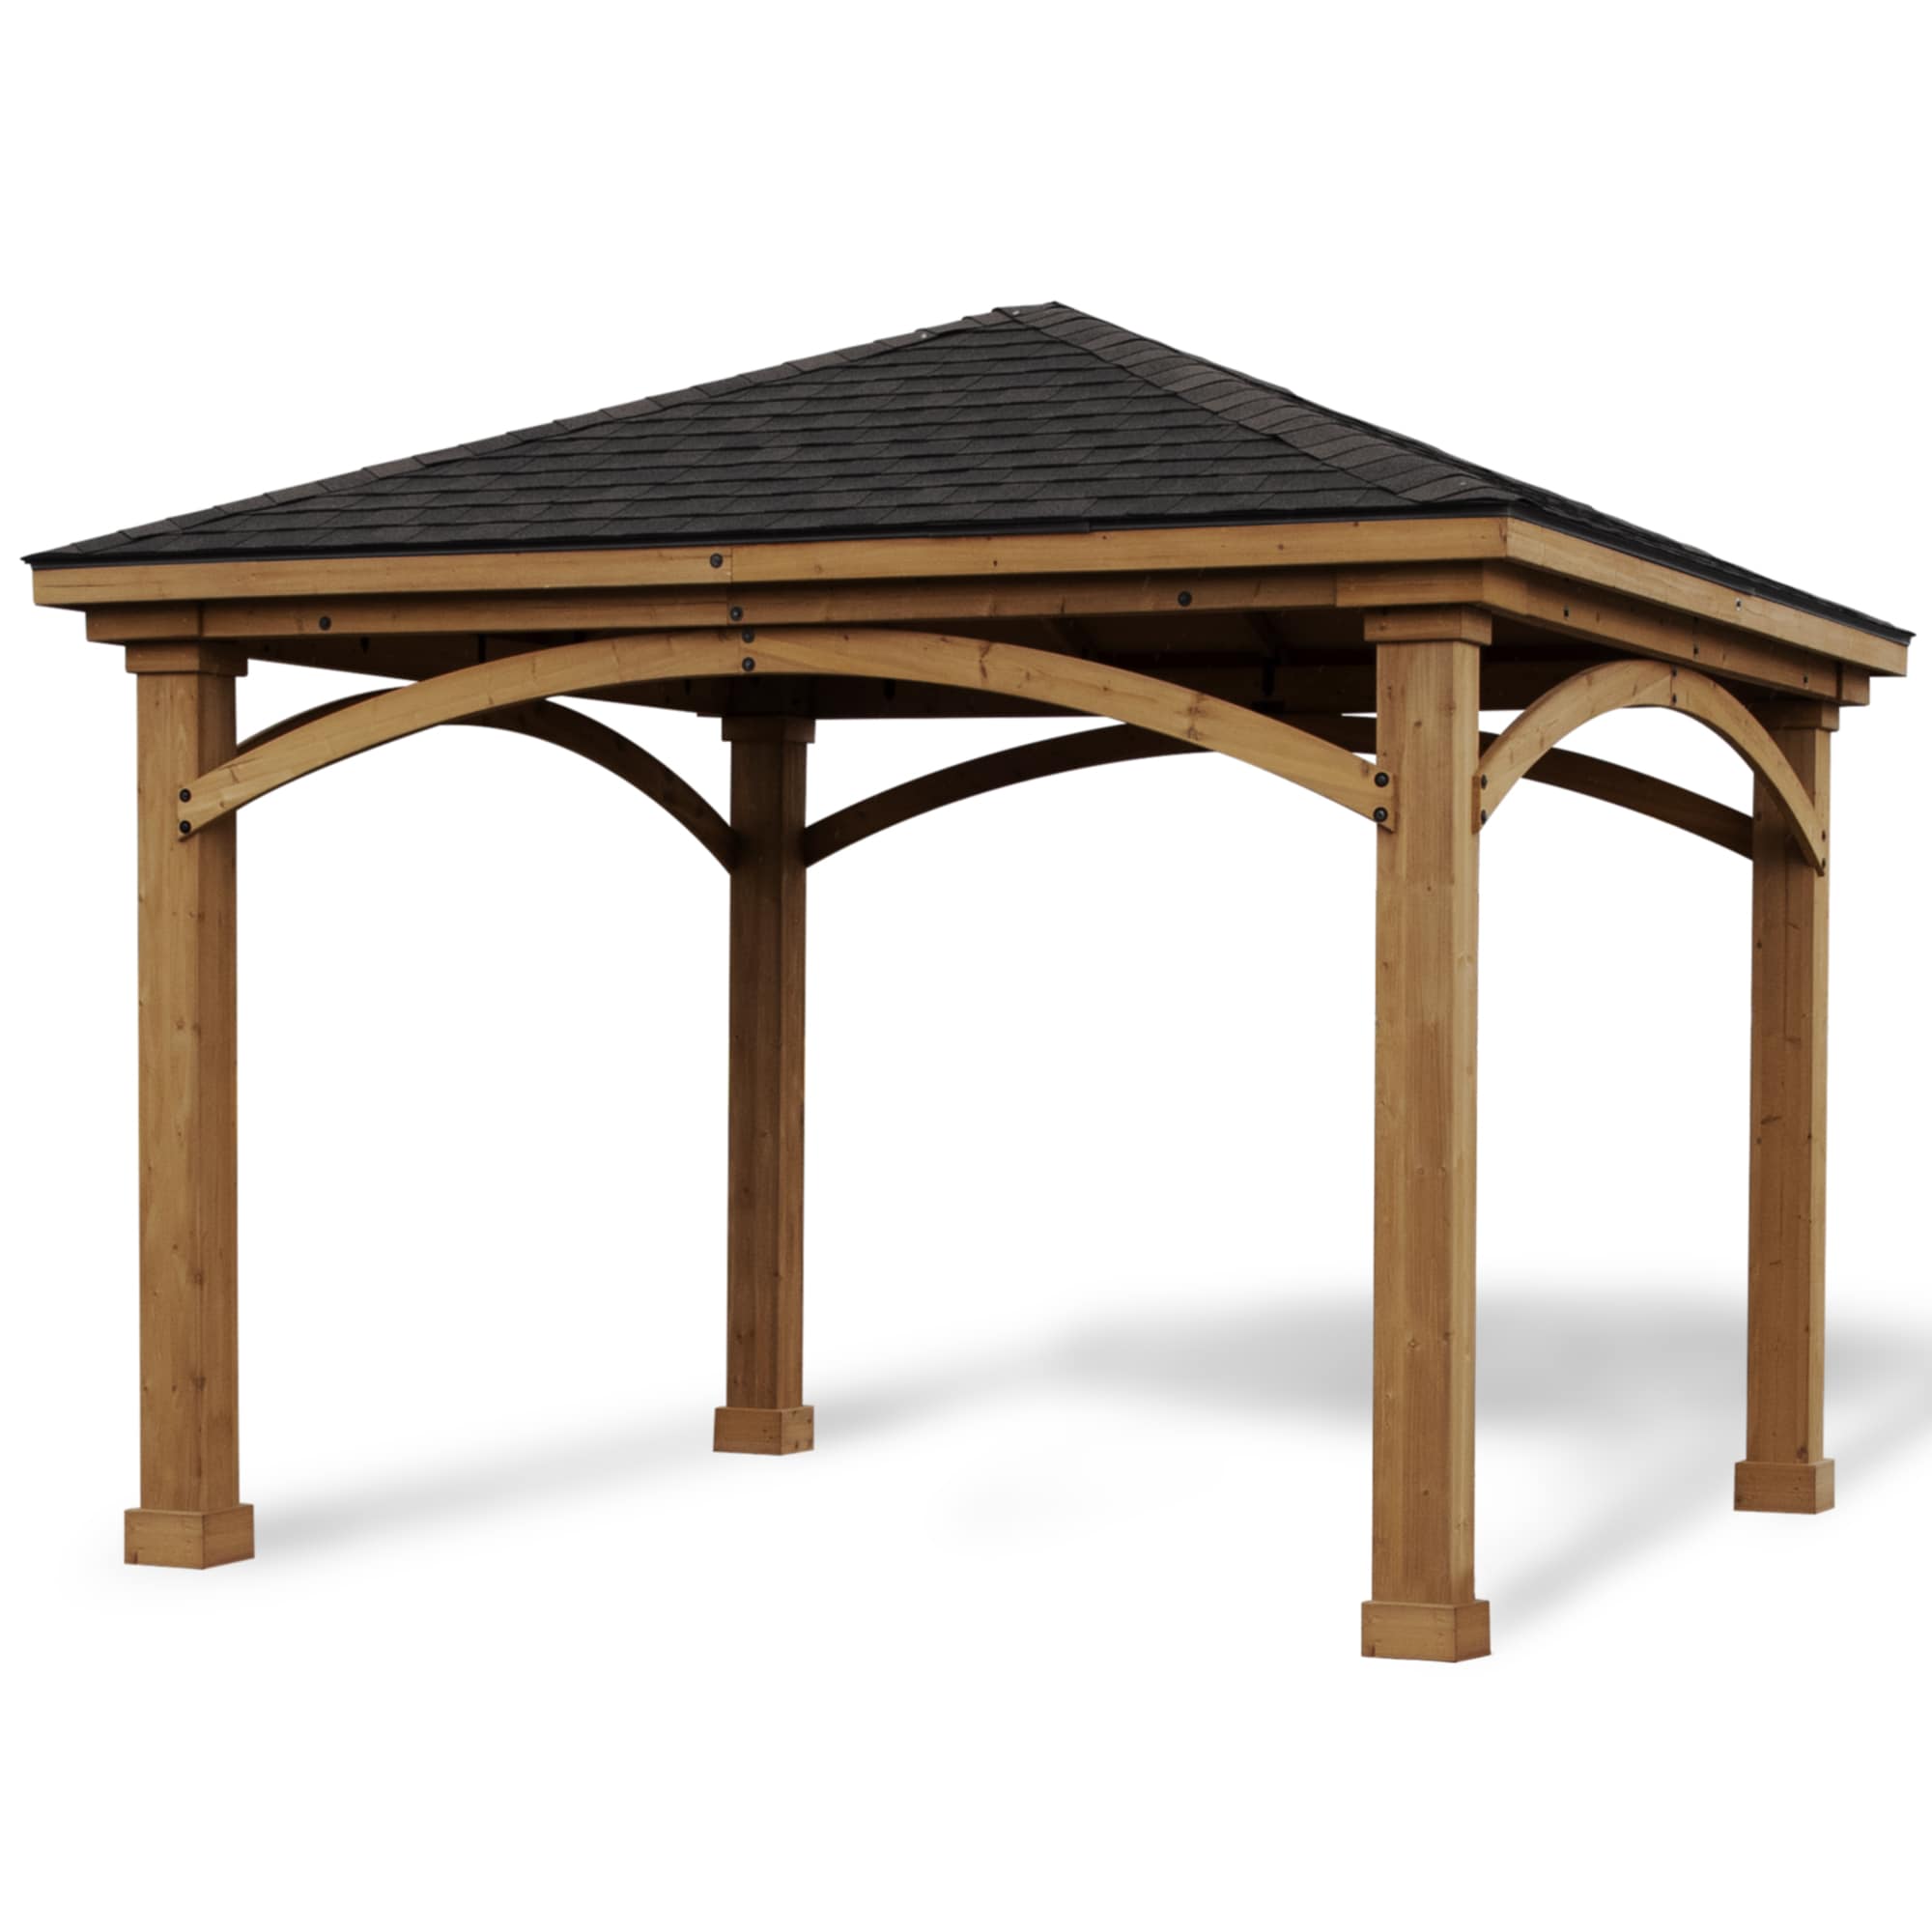 Heartland Cedar Pavilion 12-ft W x 12-ft L x 10-ft 6-in Stained Cedar Freestanding Pergola with Canopy on Sale At Lowe's